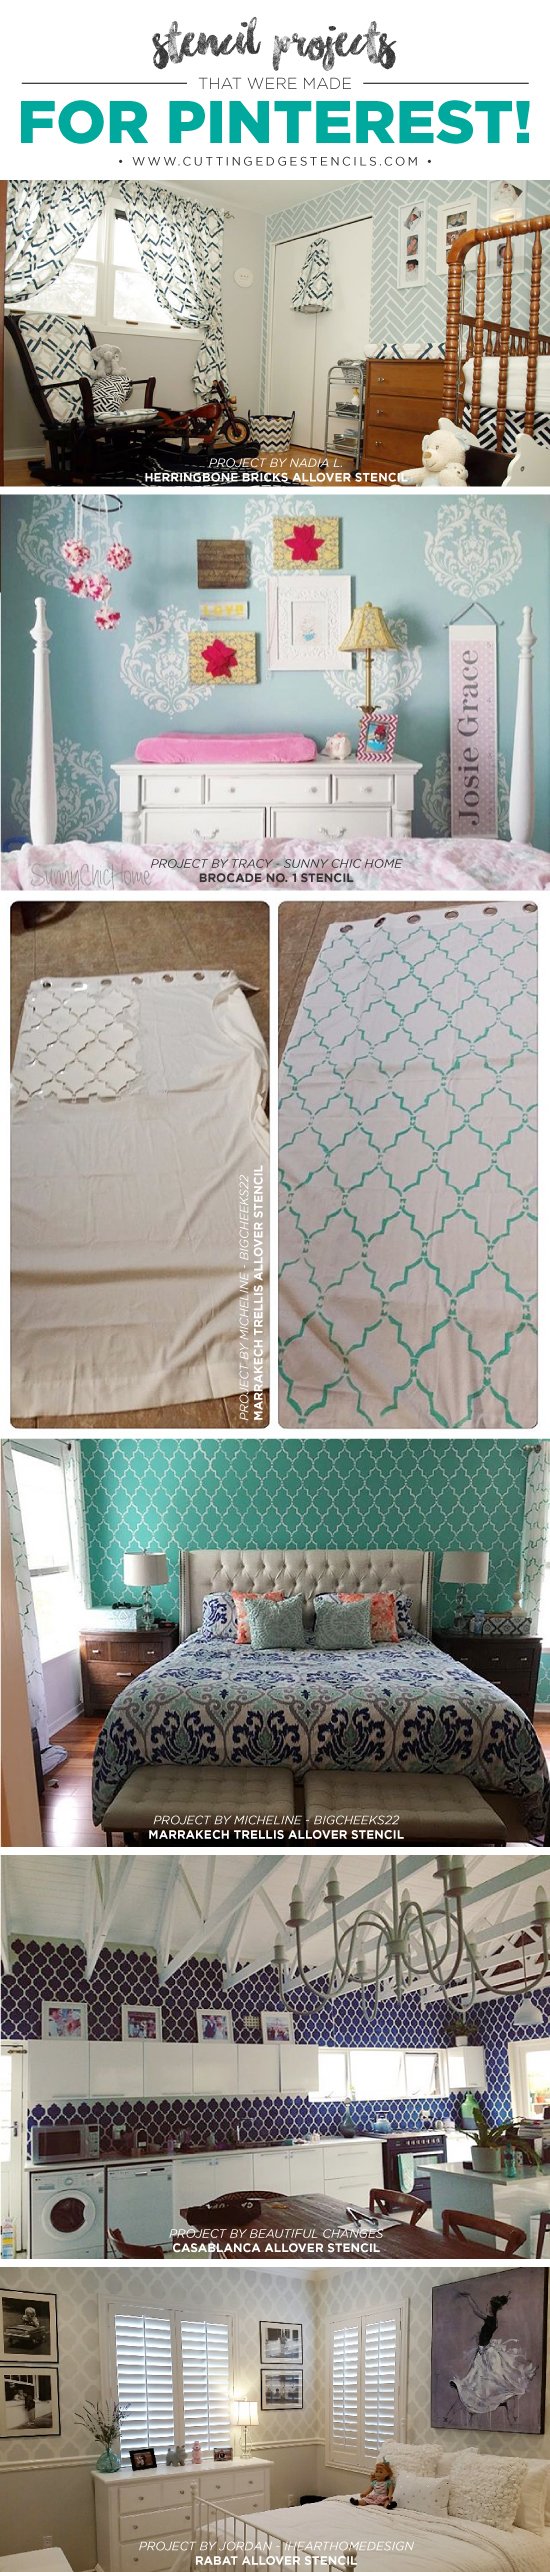 Cutting Edge Stencils shares DIY stenciled room ideas and home decor projects. http://www.cuttingedgestencils.com/wall-stencils-stencil-designs.html